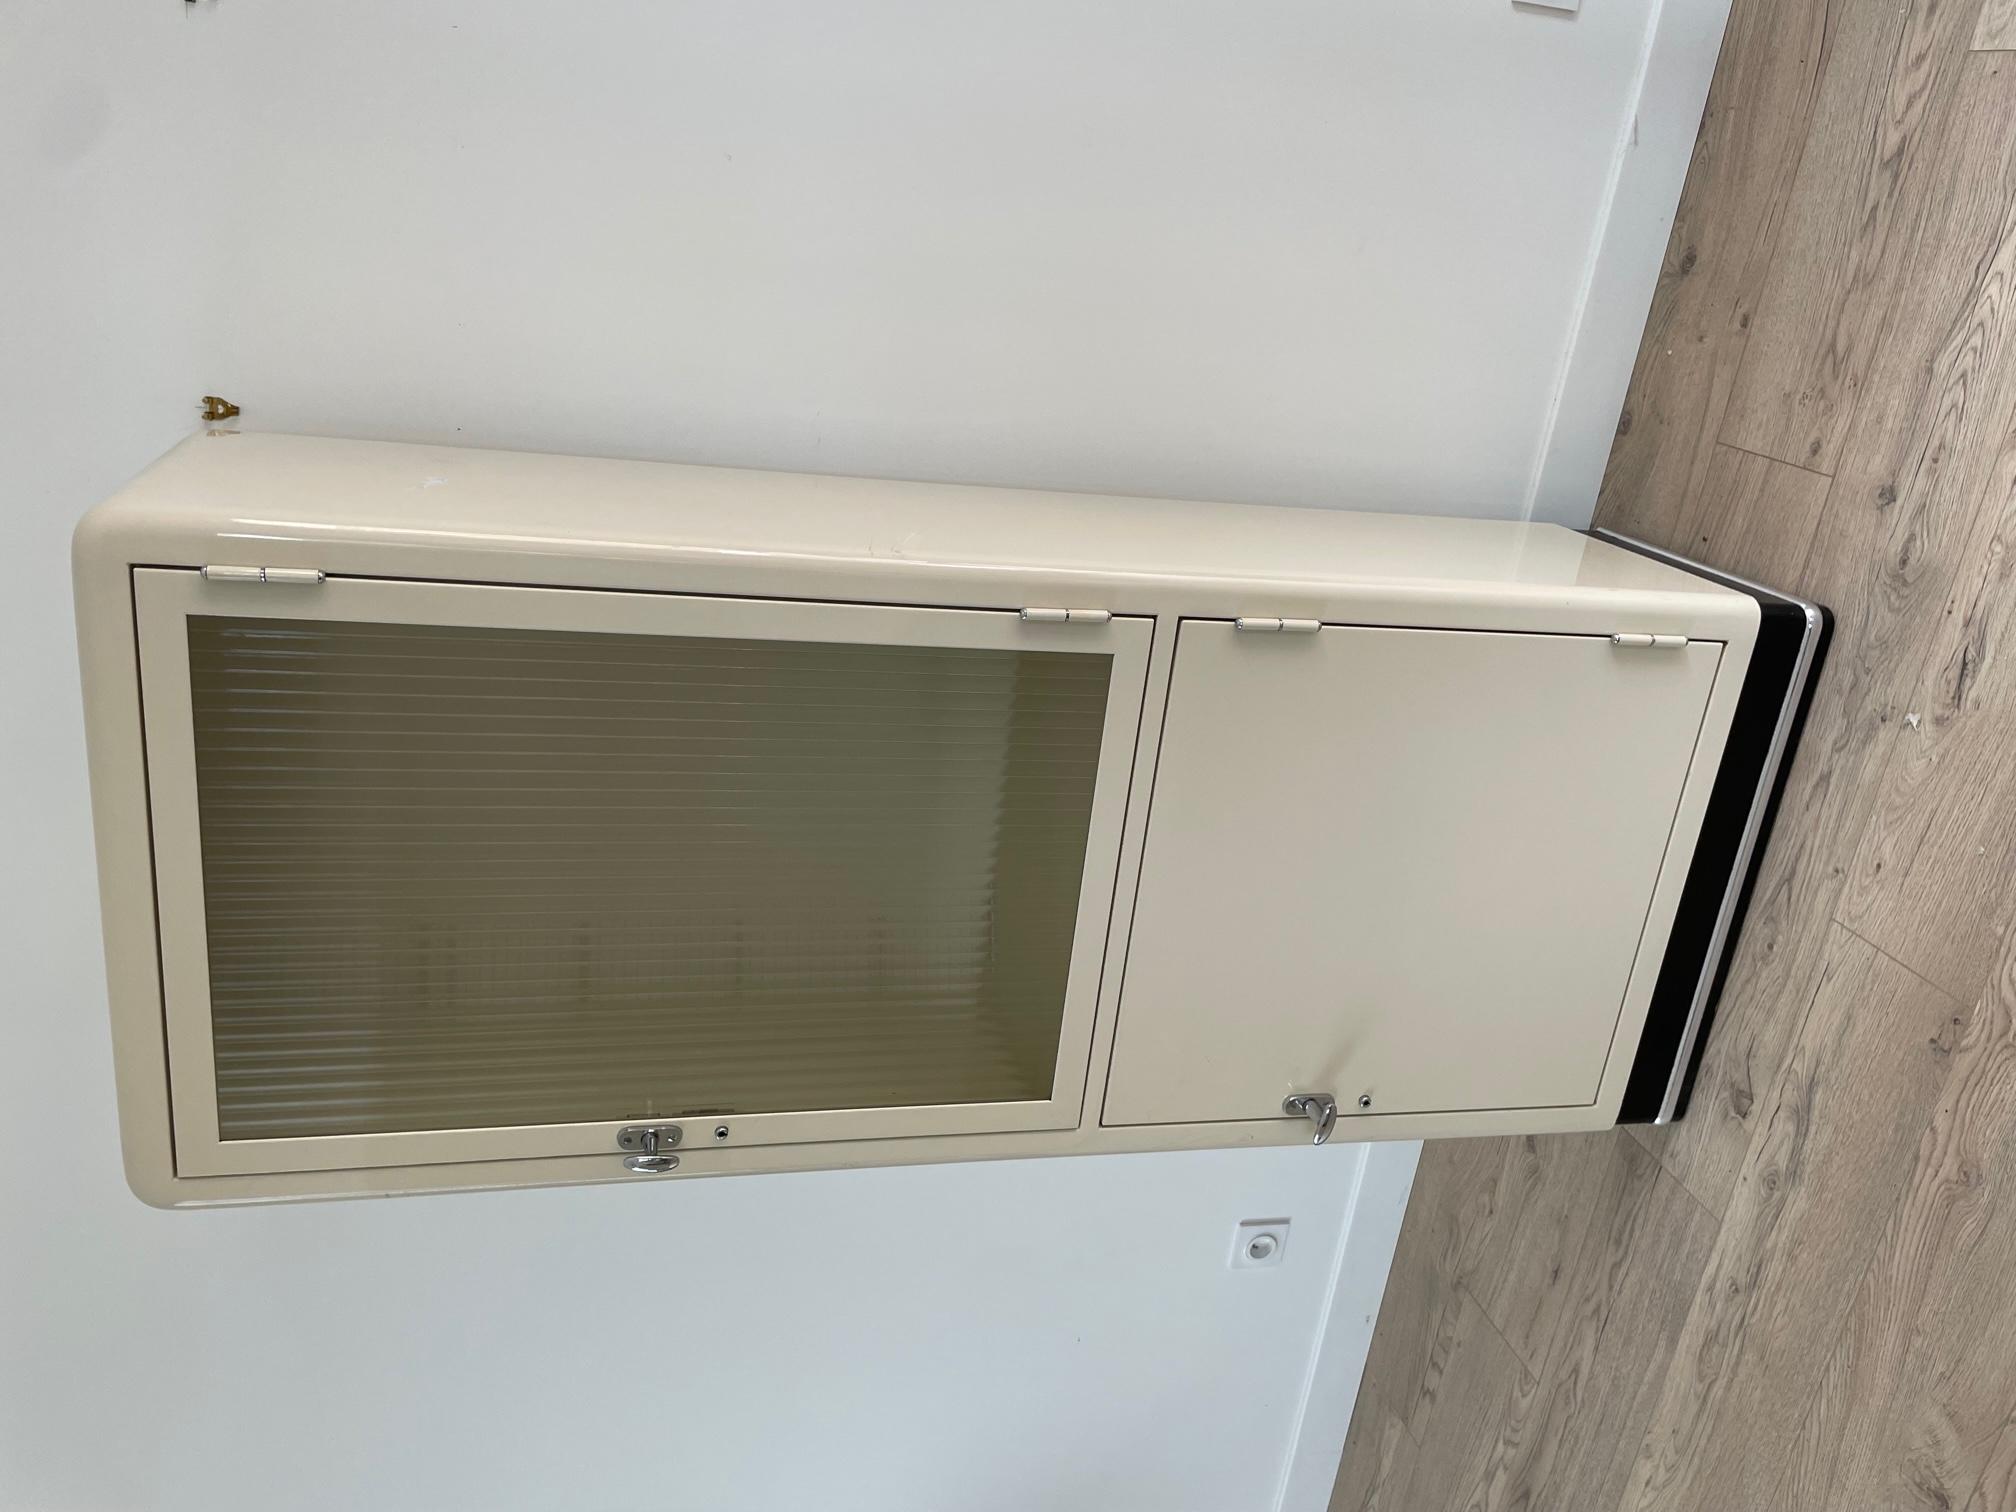 20th Century metal cabinet made in the 1950s for a doctor or dentist office. 
On the inside, there are many glass shelves. Metal chromed handles. 
The door glass is ribbed. 
Very good quality and good condition. 
Made and designed by Baisch, a